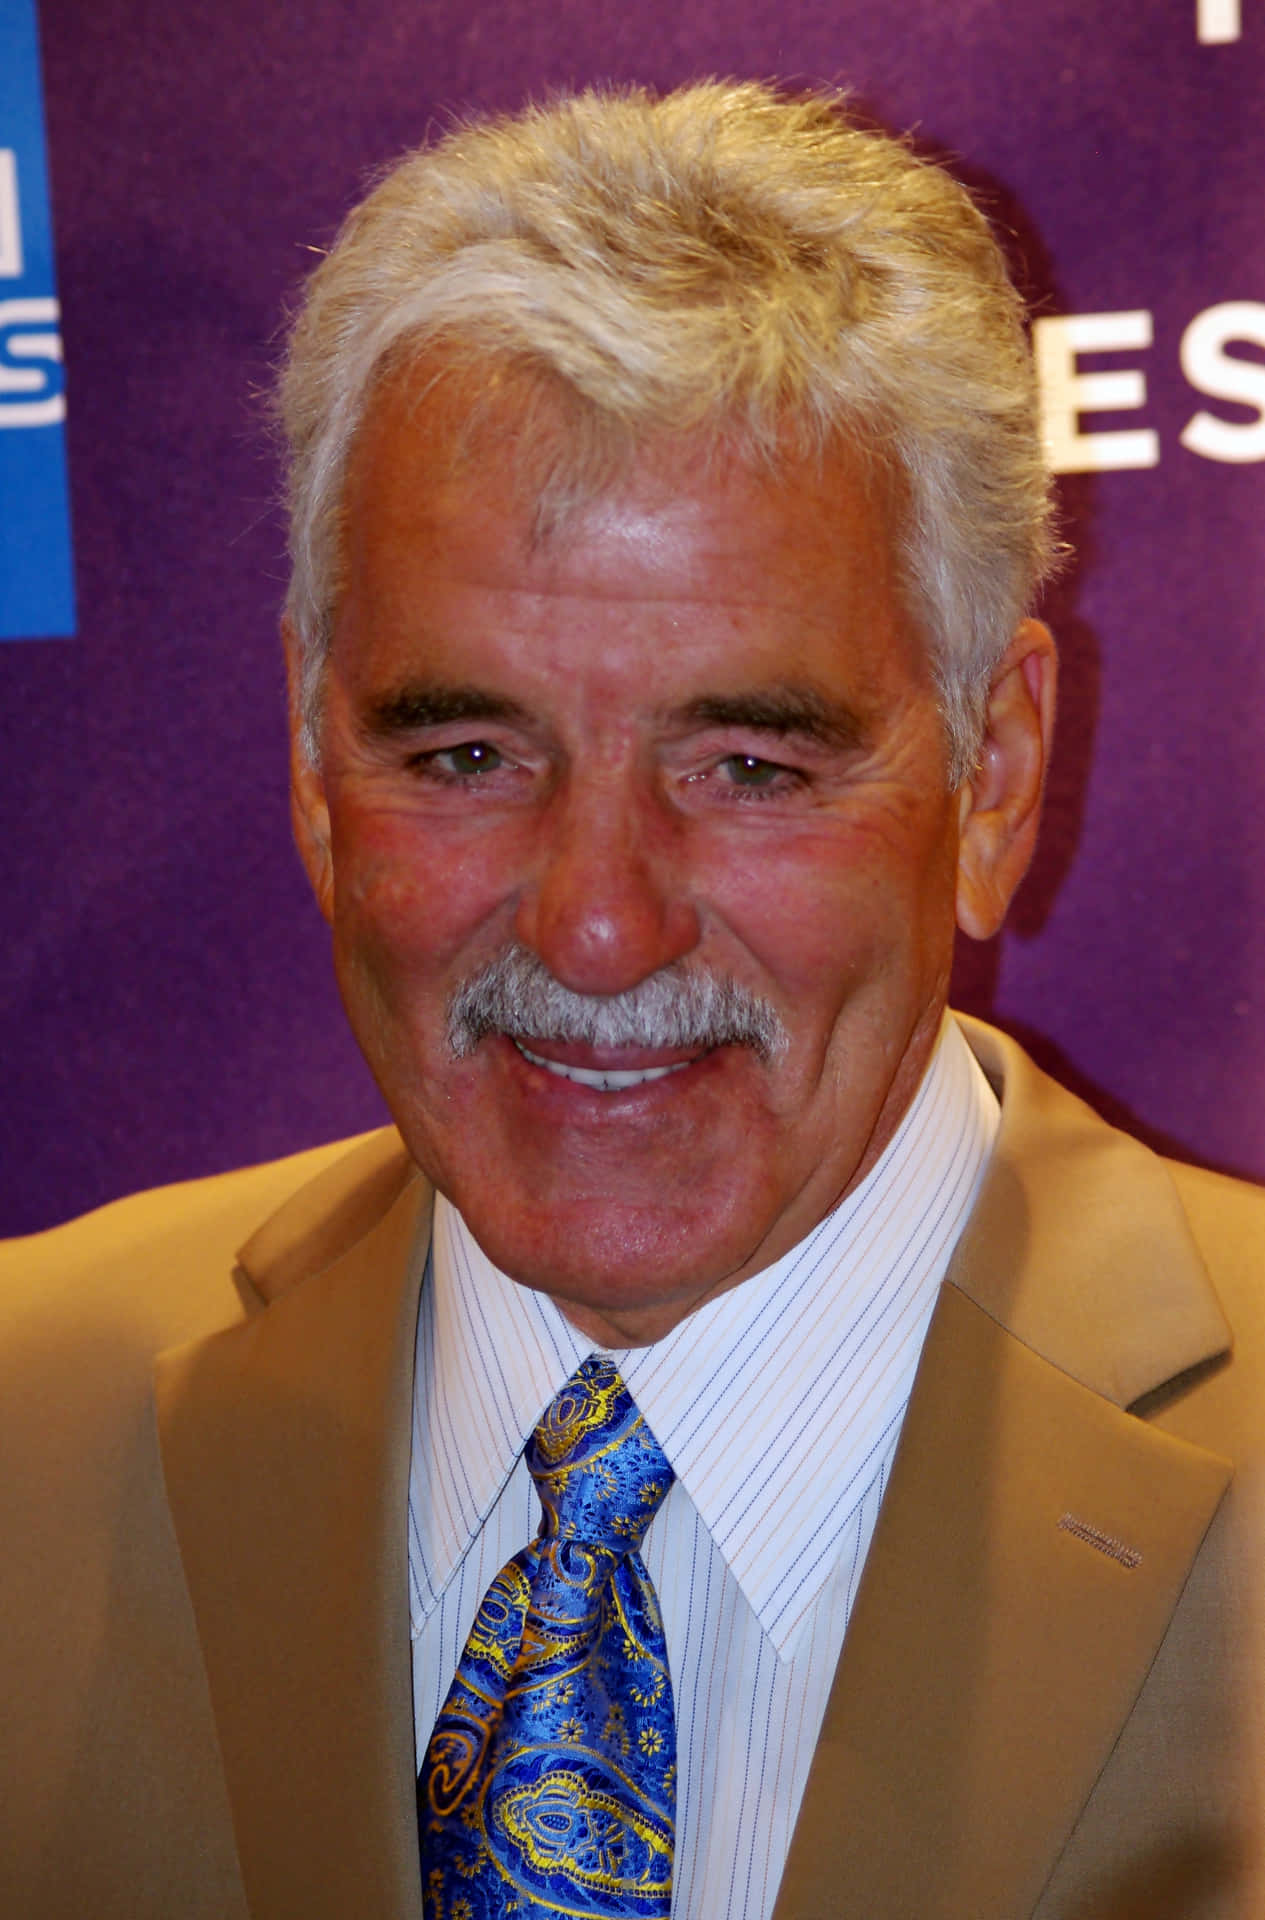 Dennis Farina posing for a photo with his iconic smile Wallpaper